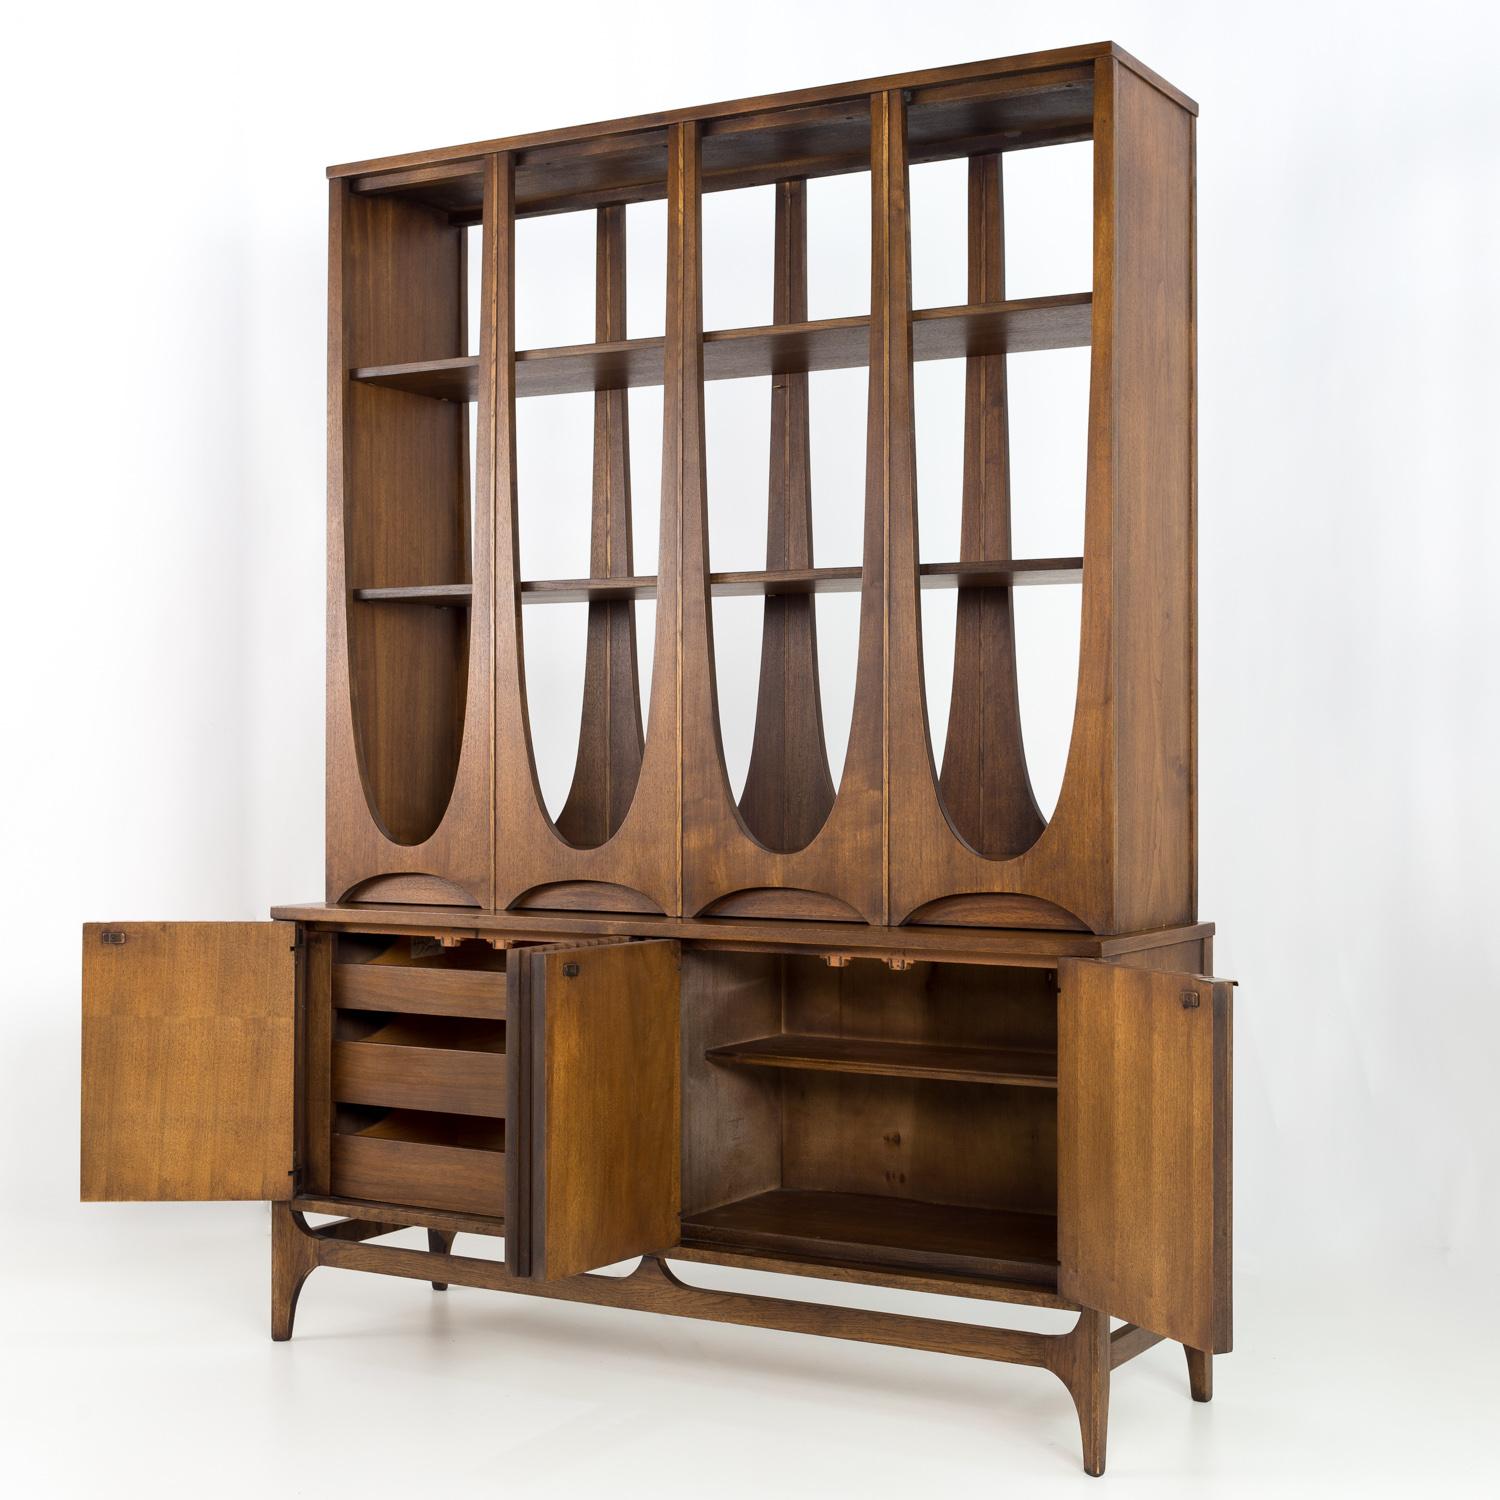 Late 20th Century Broyhill Brasilia Mid Century Room Divider Wall Unit Shelving For Sale